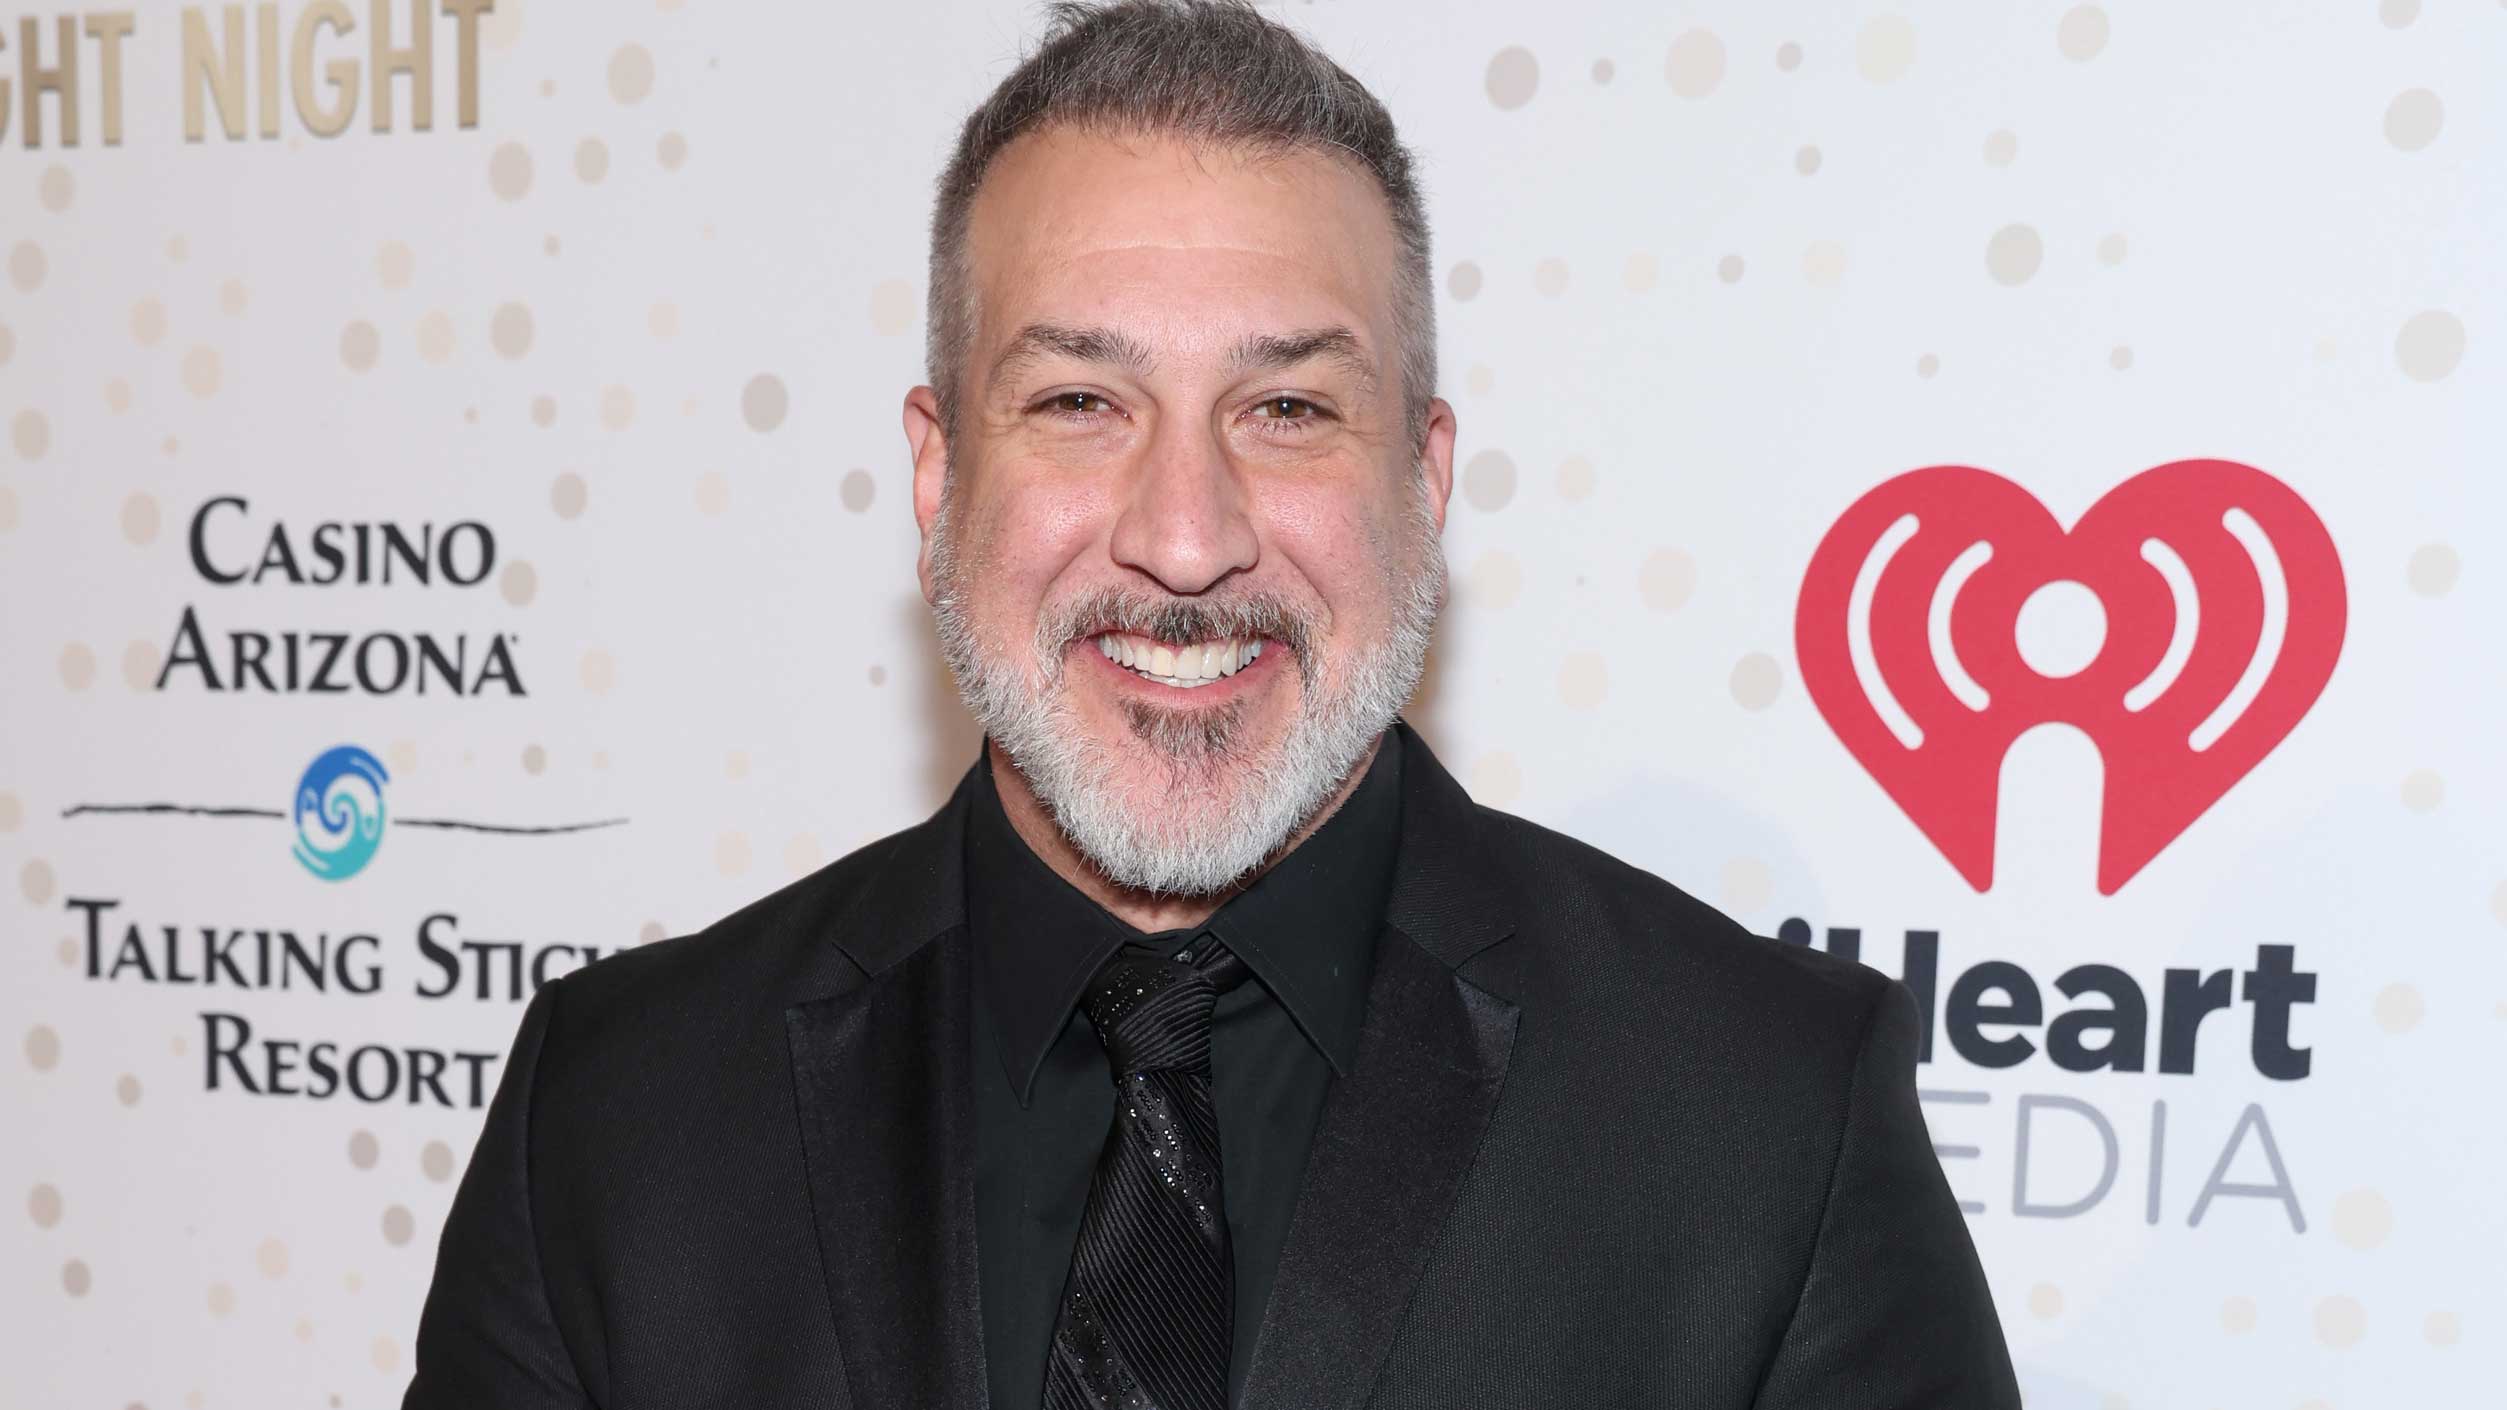 Joey Fatone admits to undergoing hair plugs, fat removal procedures